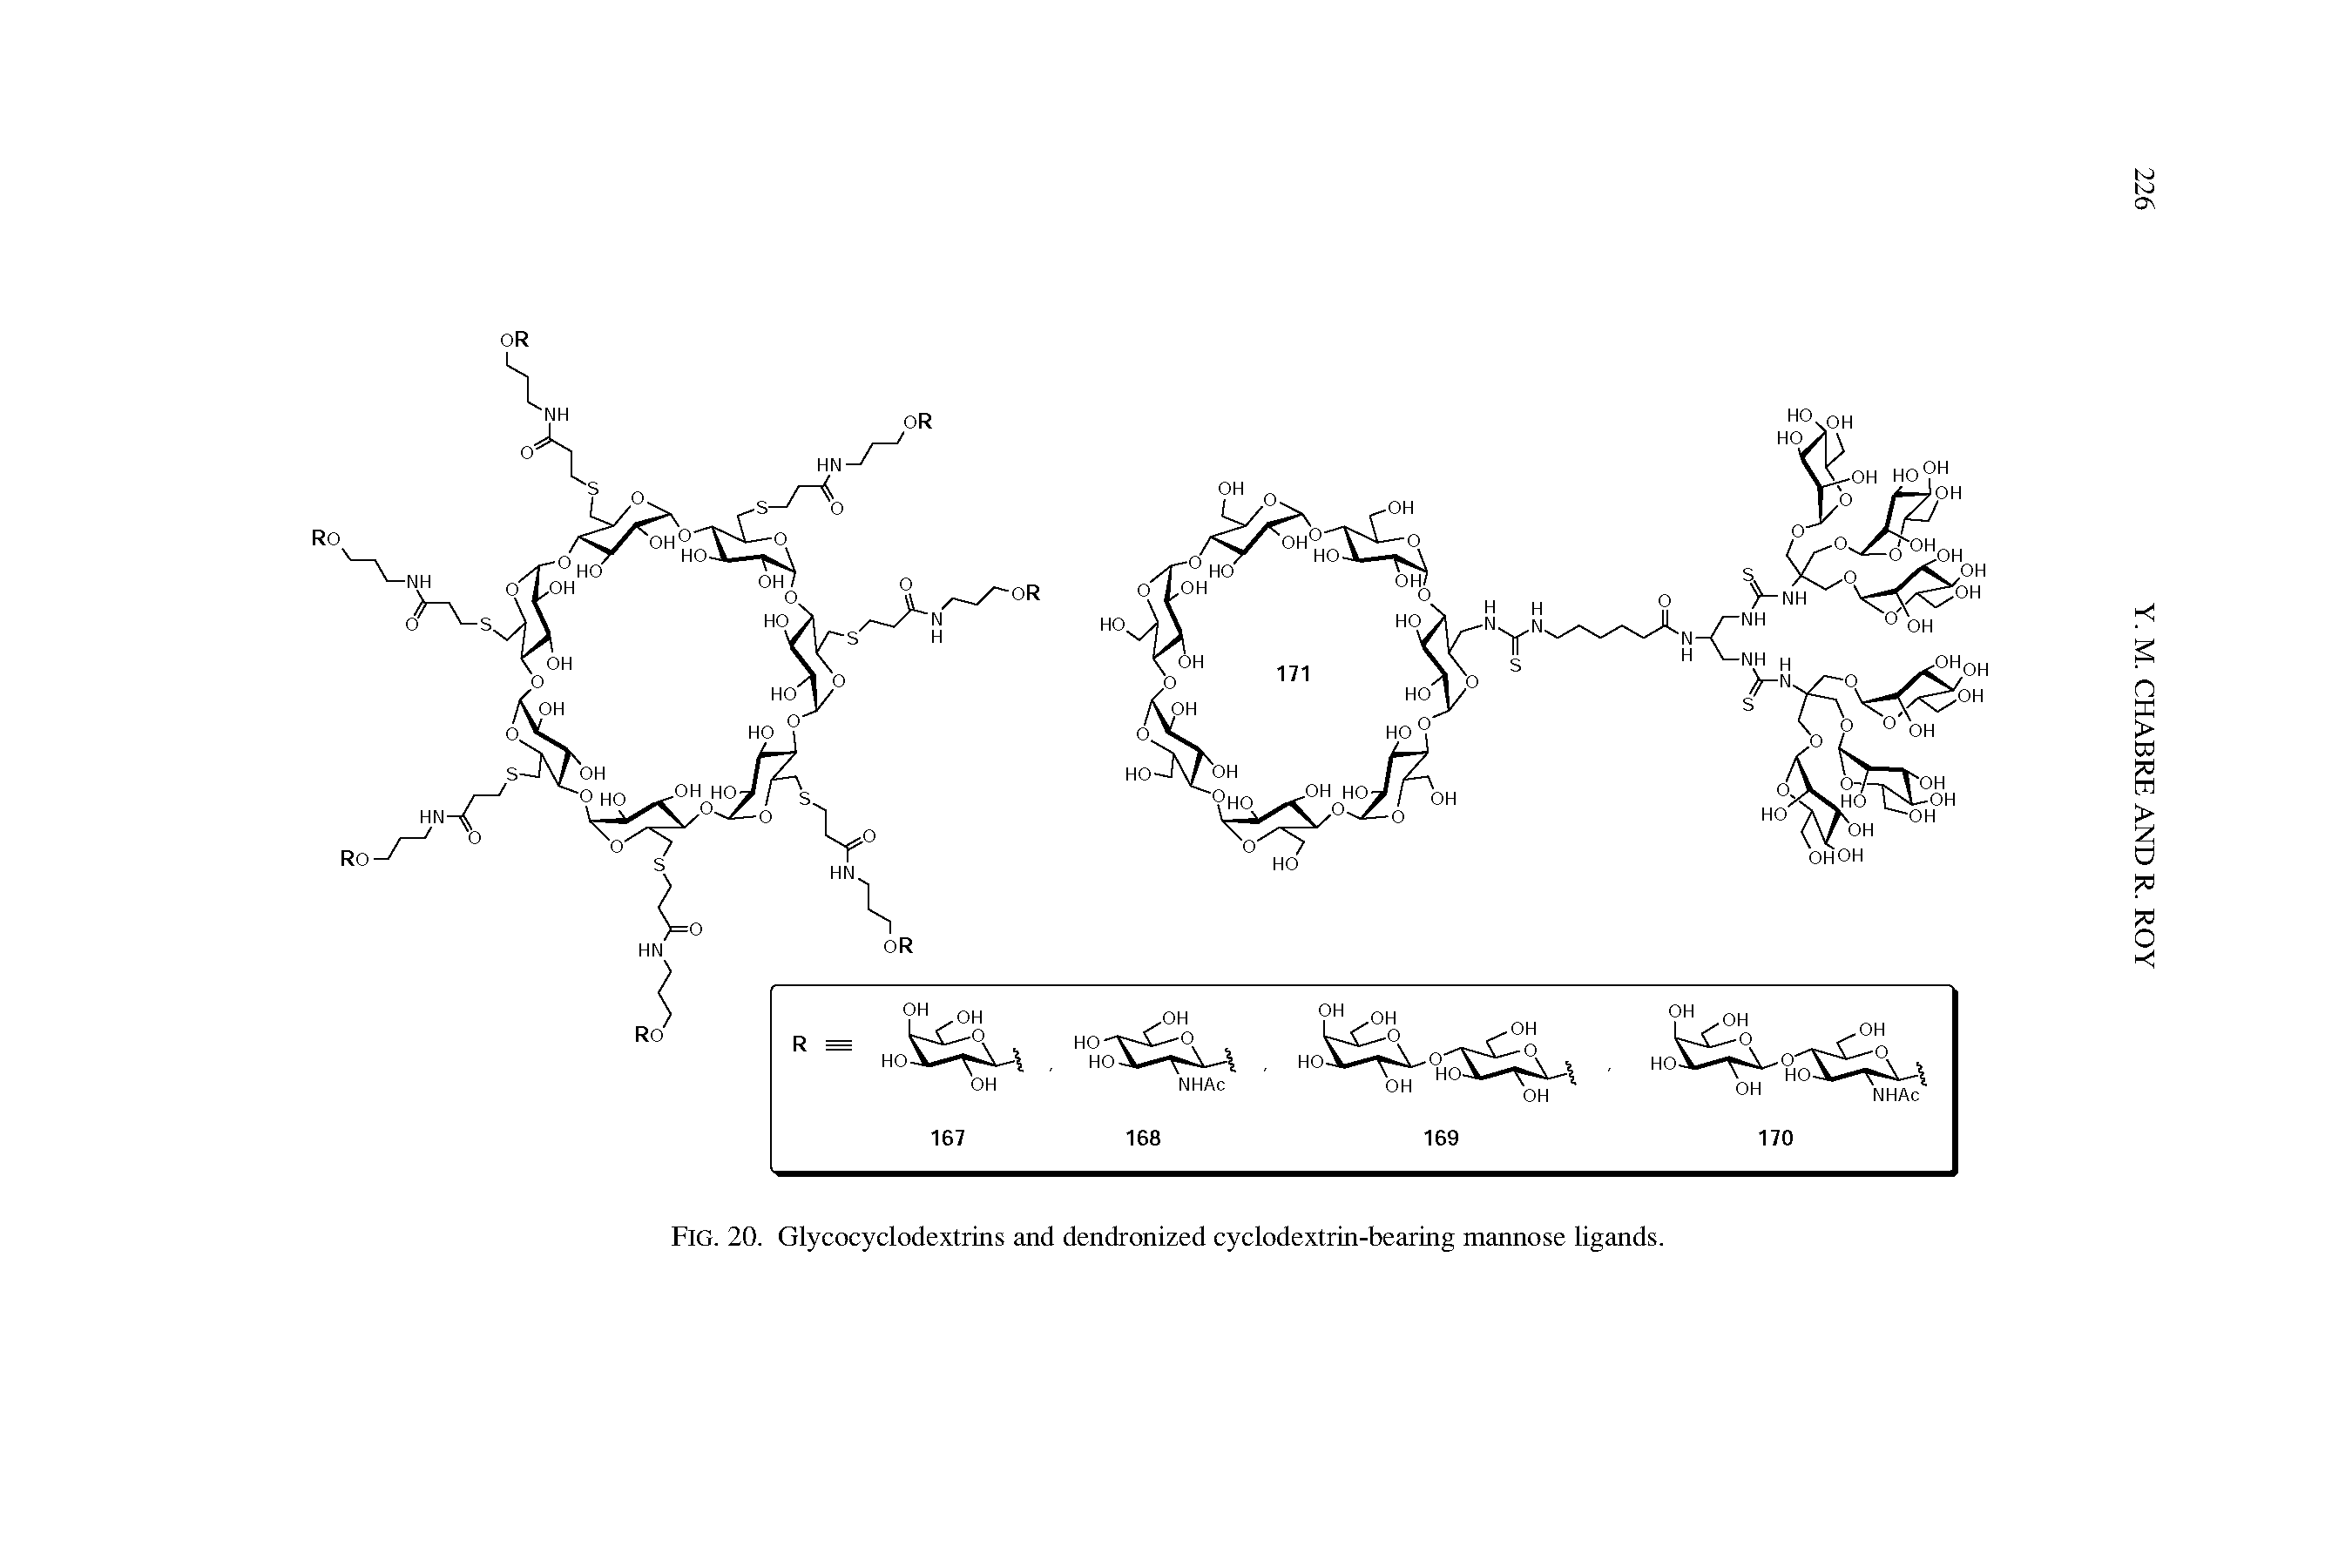 Fig. 20. Glycocyclodextrins and dendronized cyclodextrin-bearing mannose ligands.